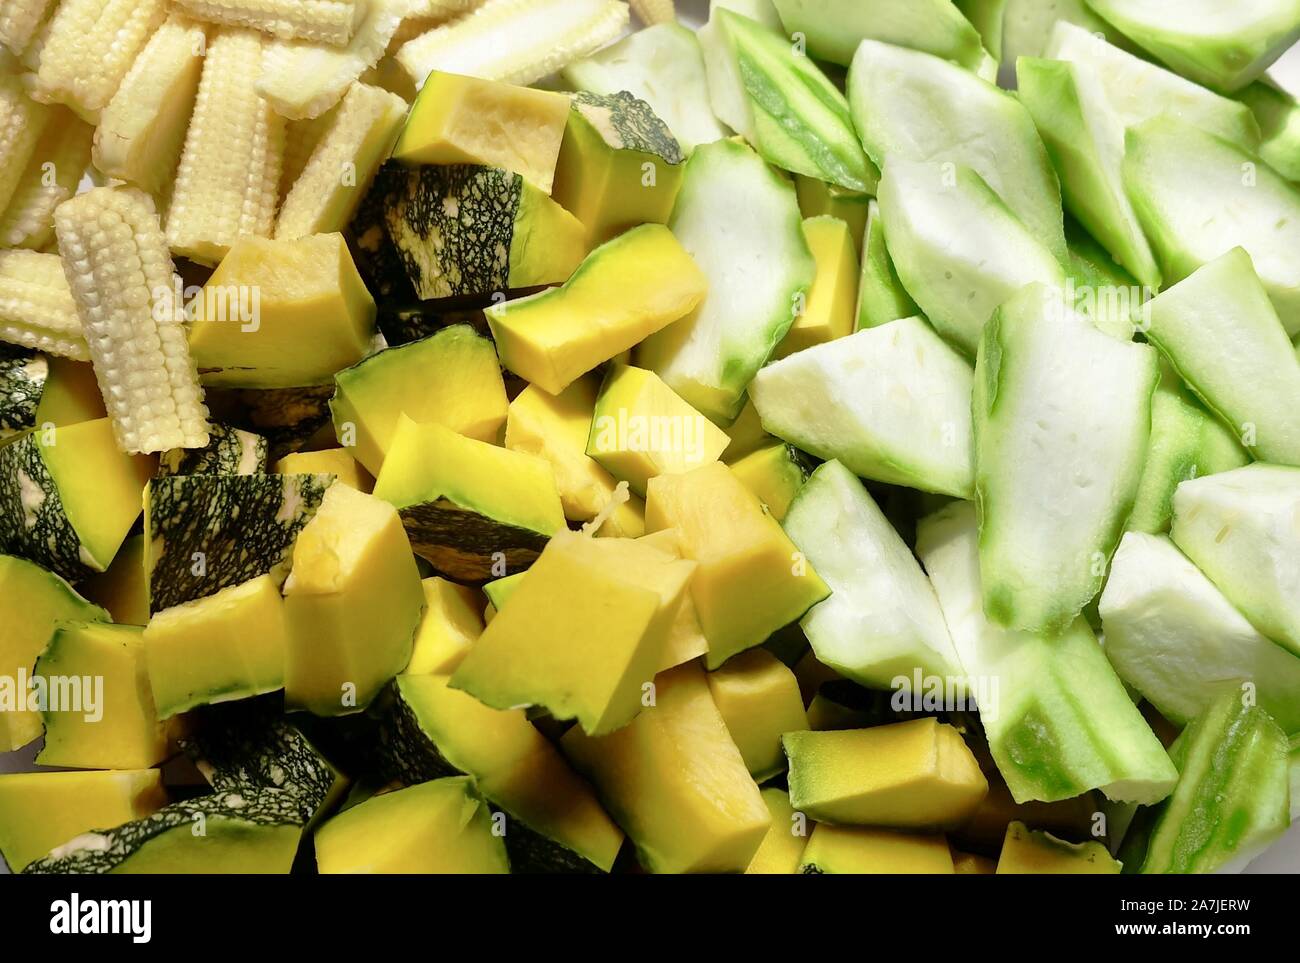 Vegetable, Closeup Raw Chopped Pumpkins, Angled Gourds or Sponge Gourds and Baby Corns. Stock Photo